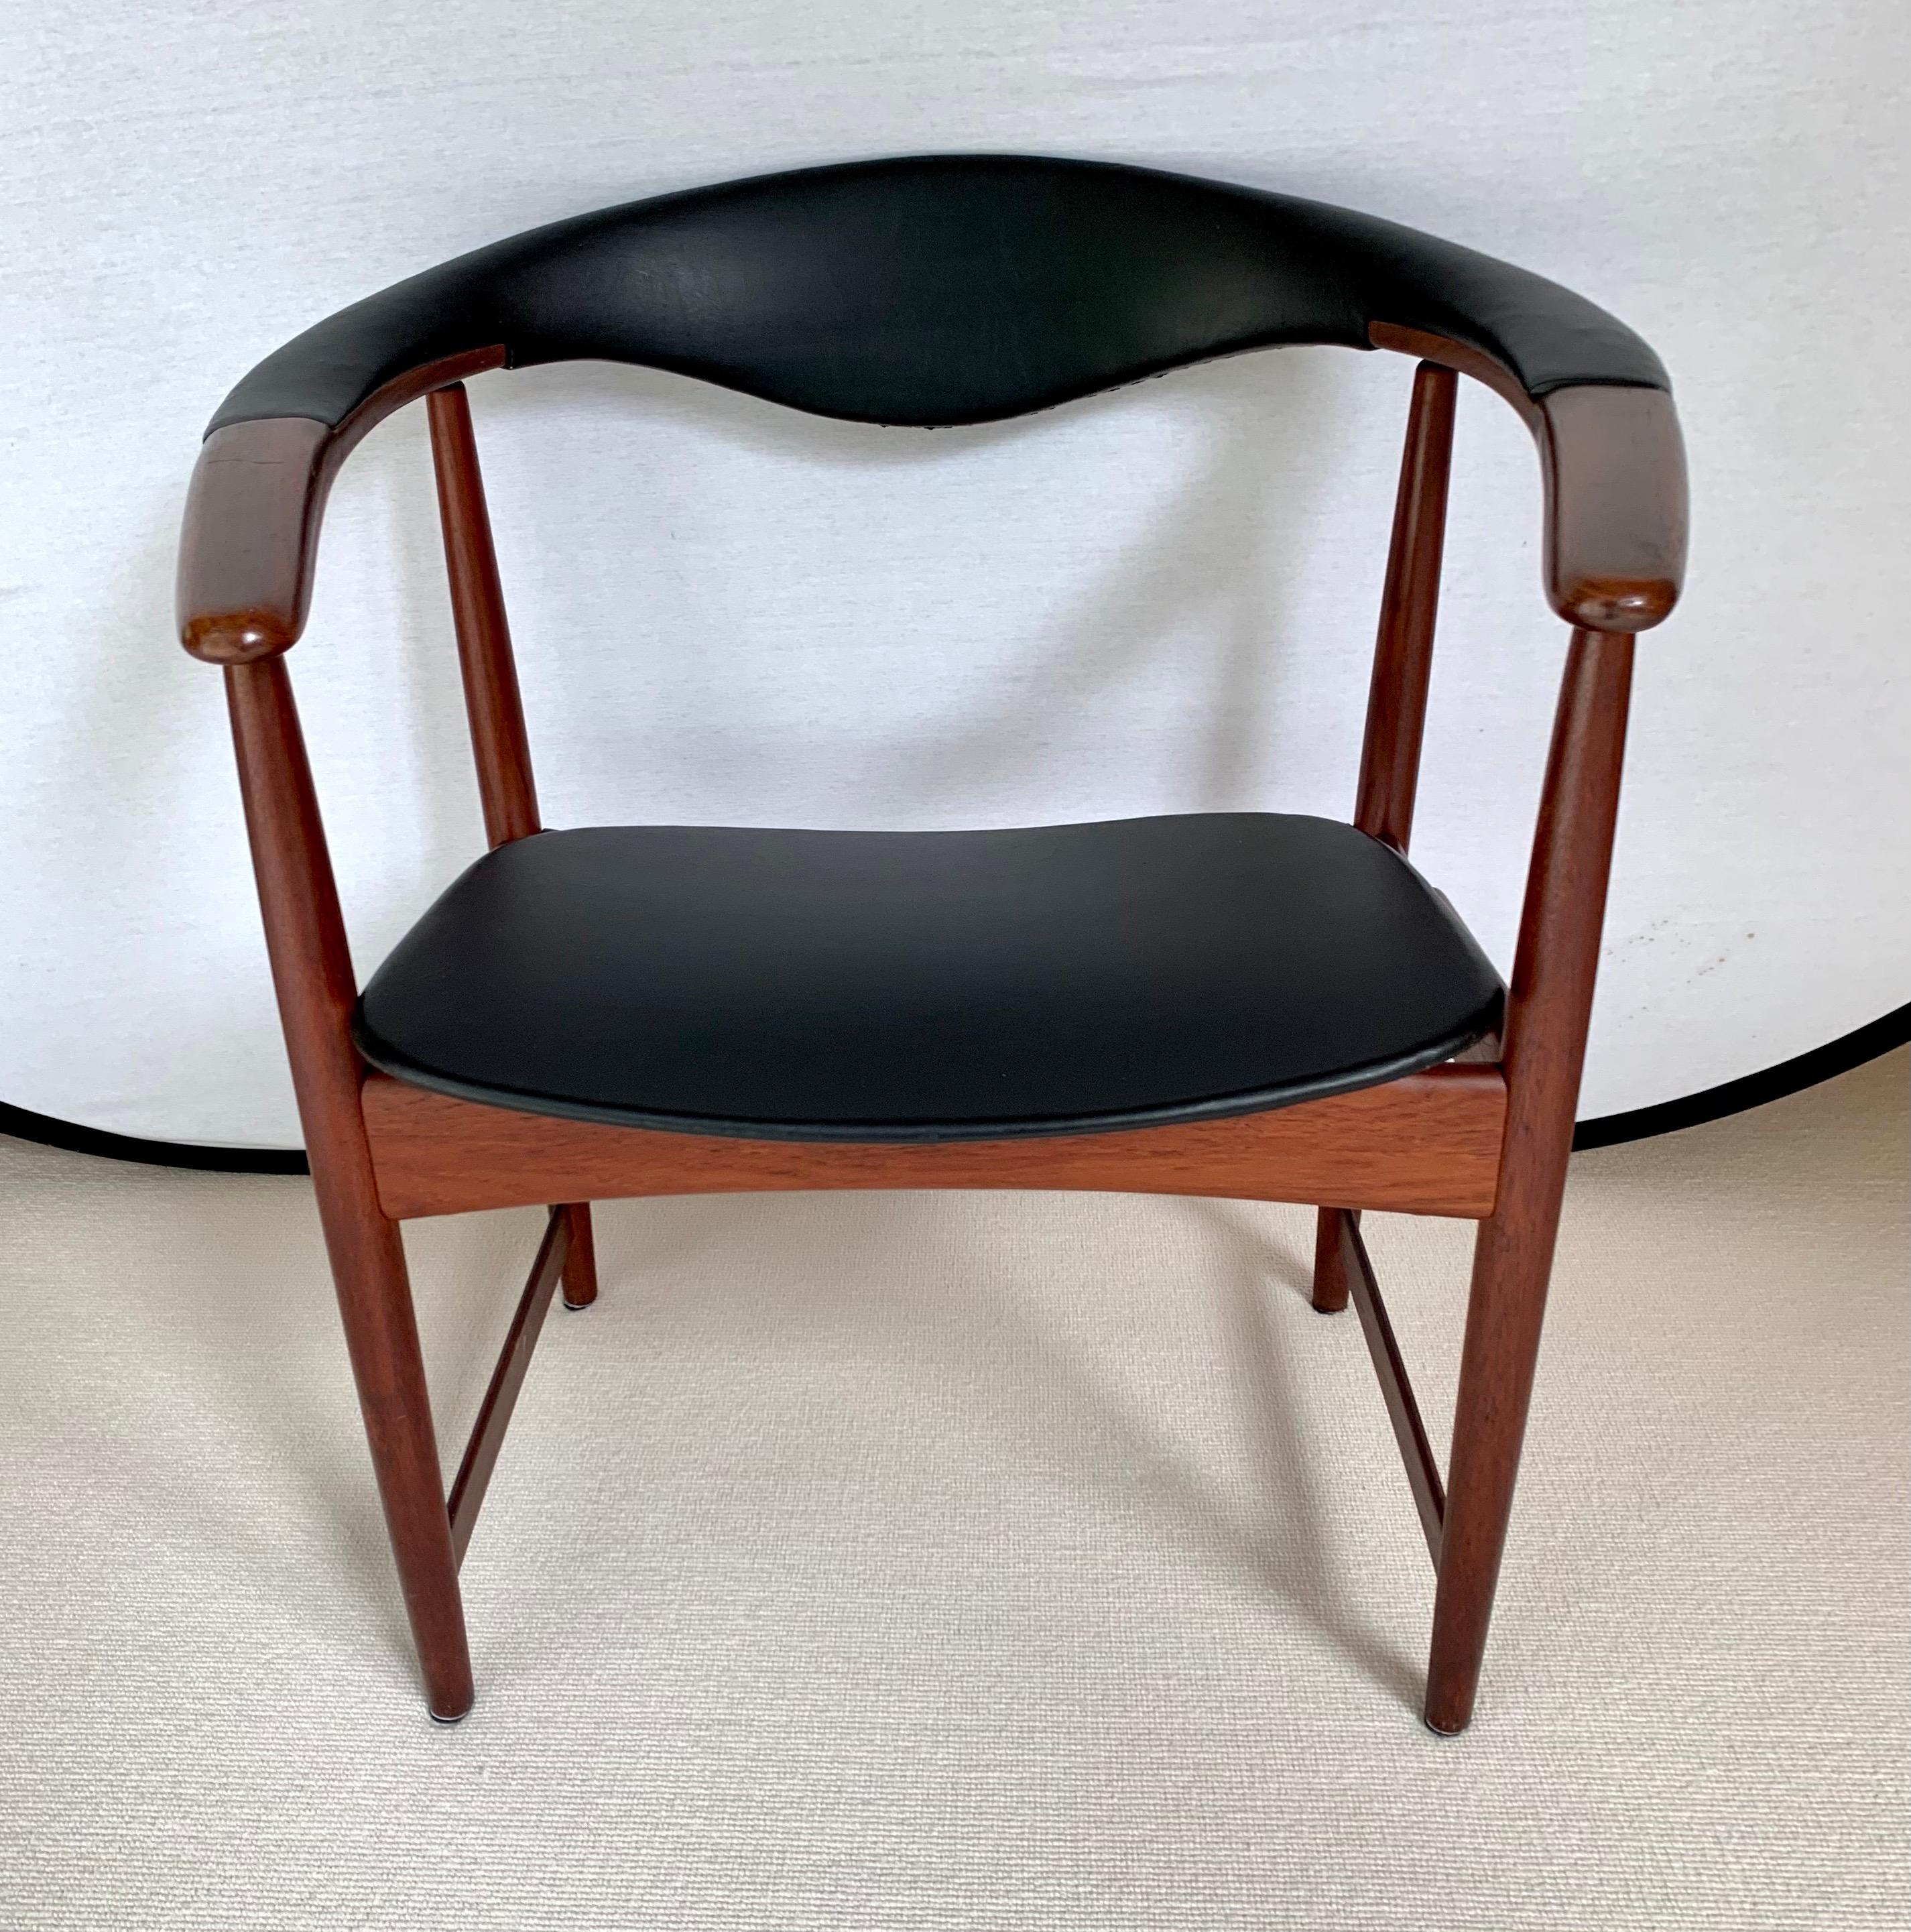 Vintage Danish modern armchair designed by Arne Hovmand-Olsen with a rounded back and black leather upholstery. Signed on the underside.